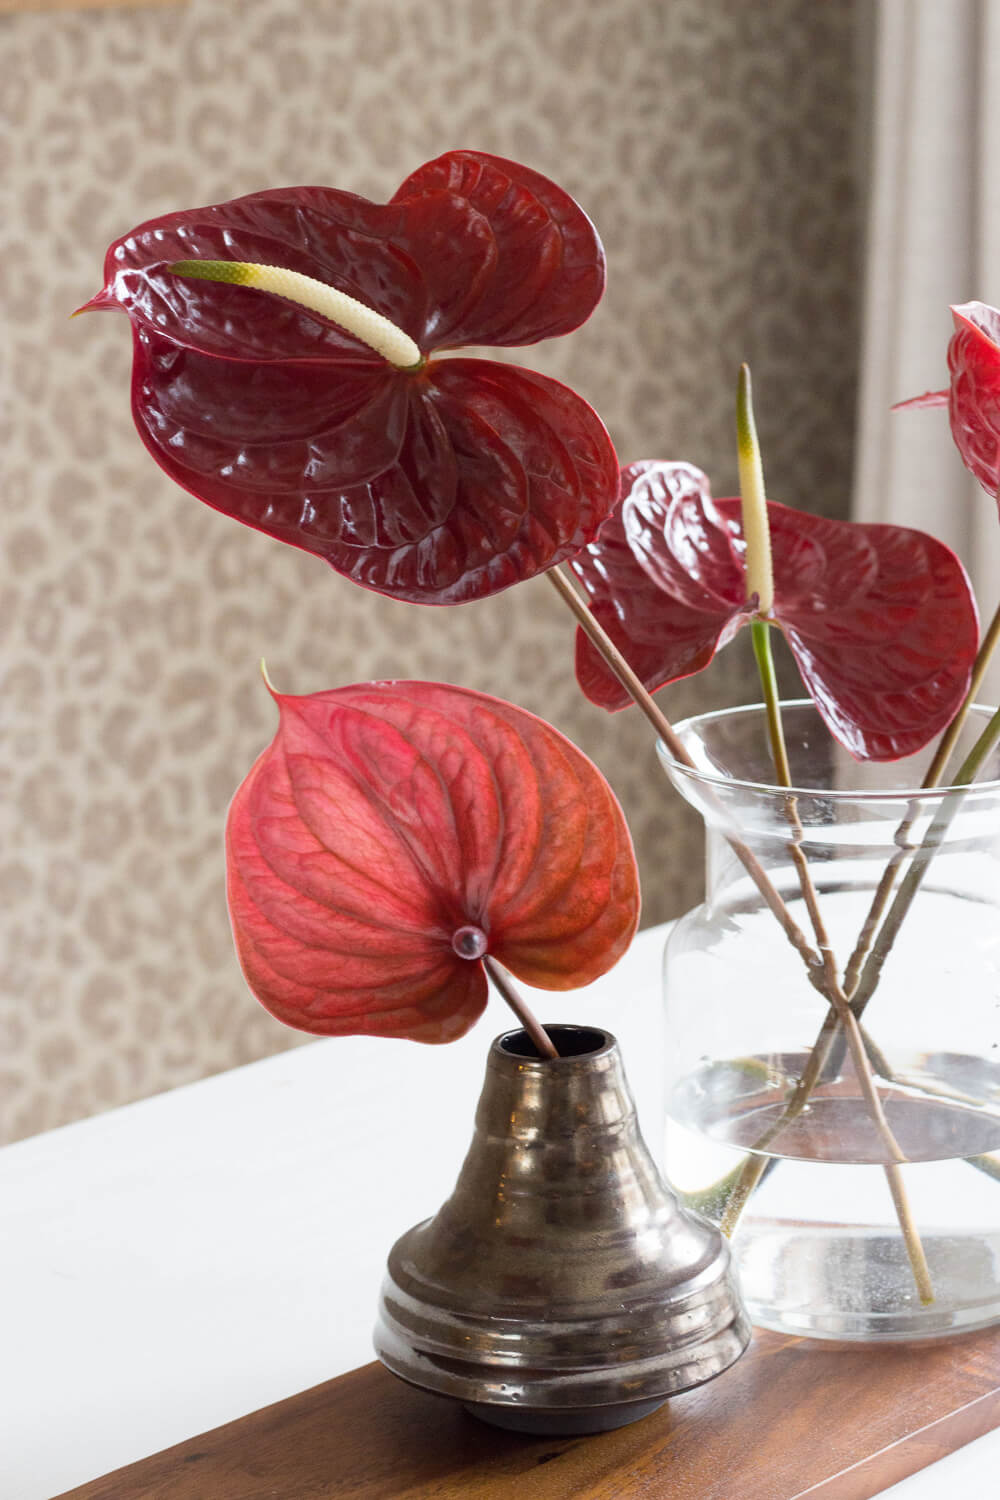 Anthurium flowers in 3 entirely different interiors